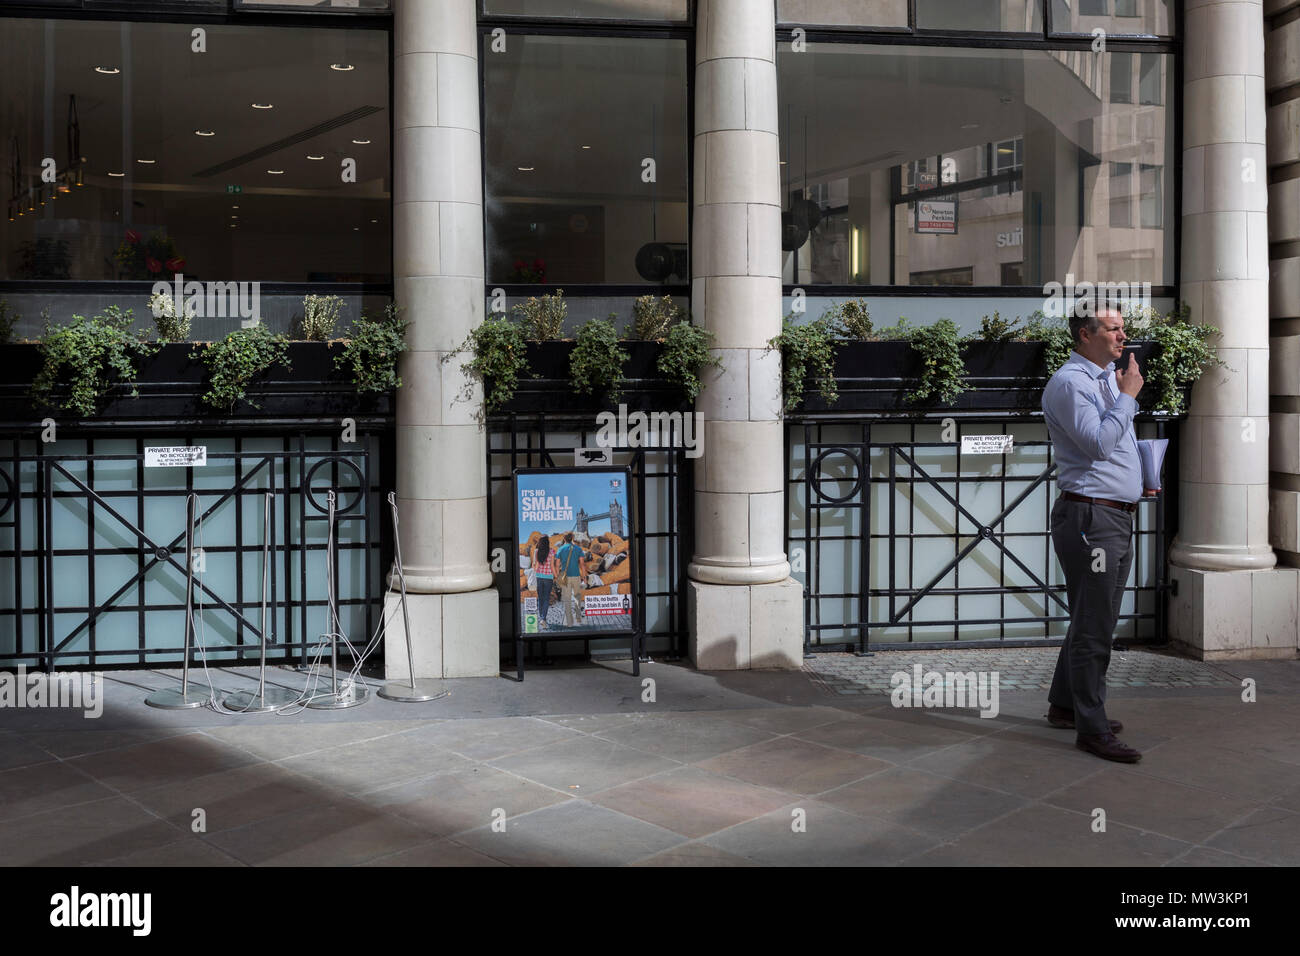 A businessman takes a cigarette break next to a sign explaining the problem of dropped cigarette butts in the City of London, the capital's financial district aka the Square Mile, on 17th May 2018, in London, UK. Stock Photo